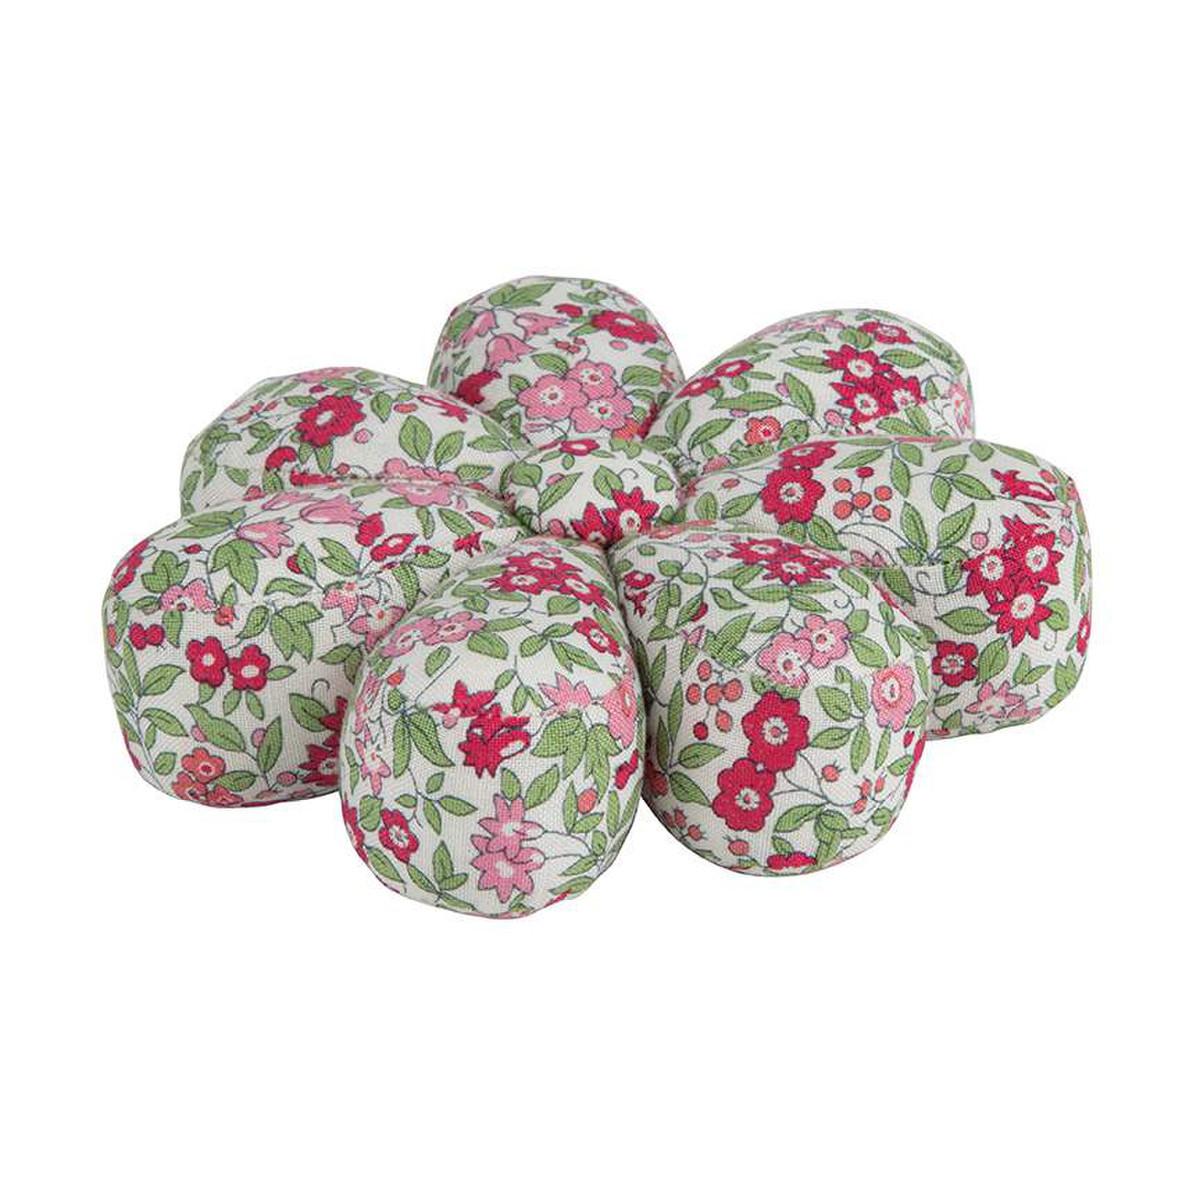 Flower Pin Cushion Pink Floral